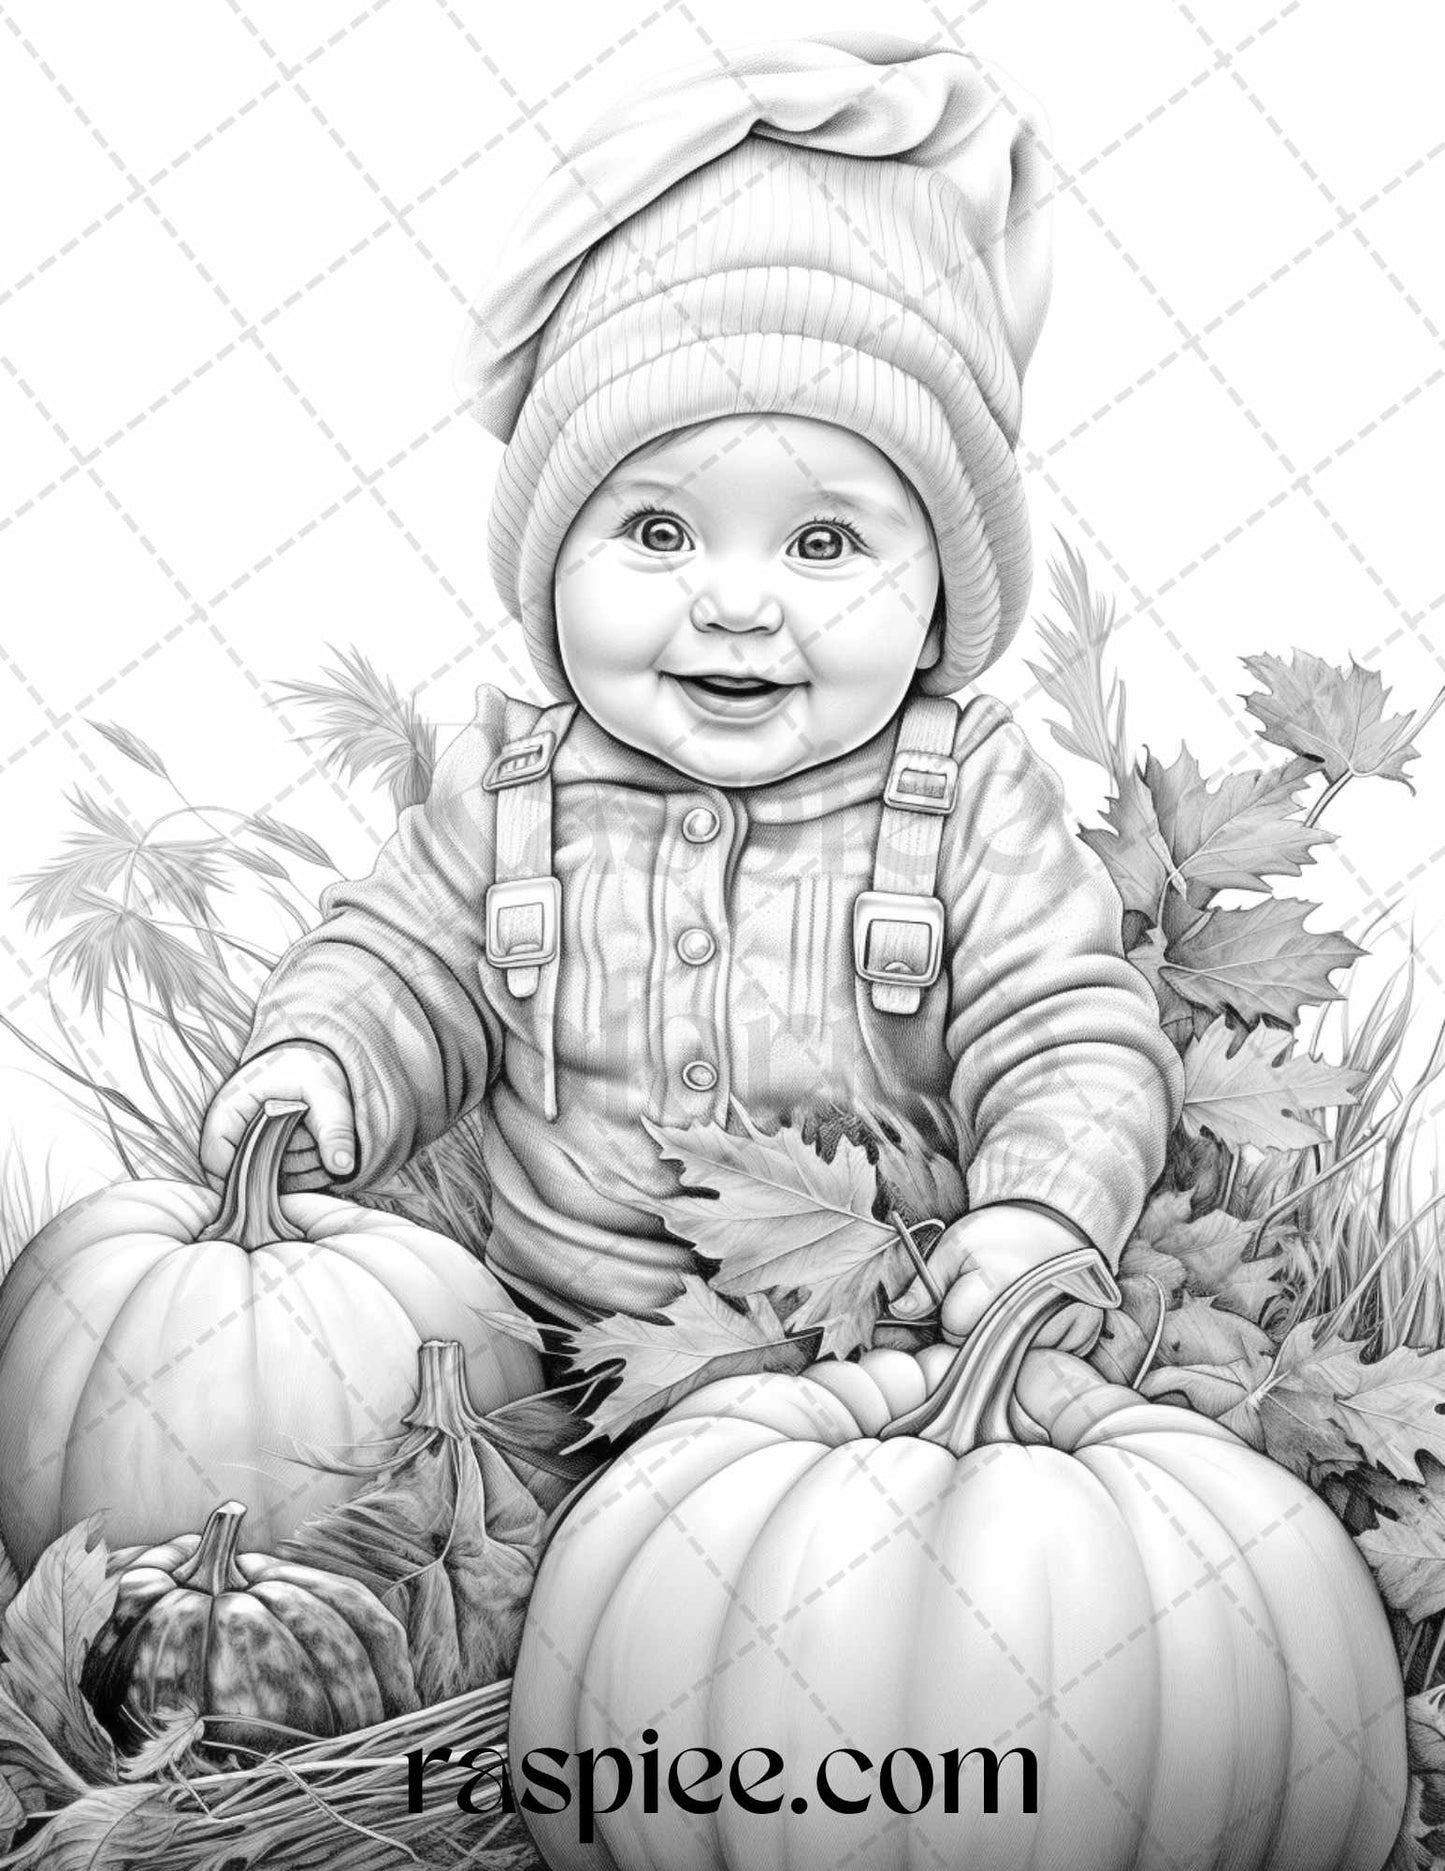 Printable Pumpkin Babies Grayscale Coloring Pages, Adult and Kids Coloring Activity, Halloween and Fall Themed Art, Instant Digital Download, Autumn Coloring Book, Relaxing DIY Craft